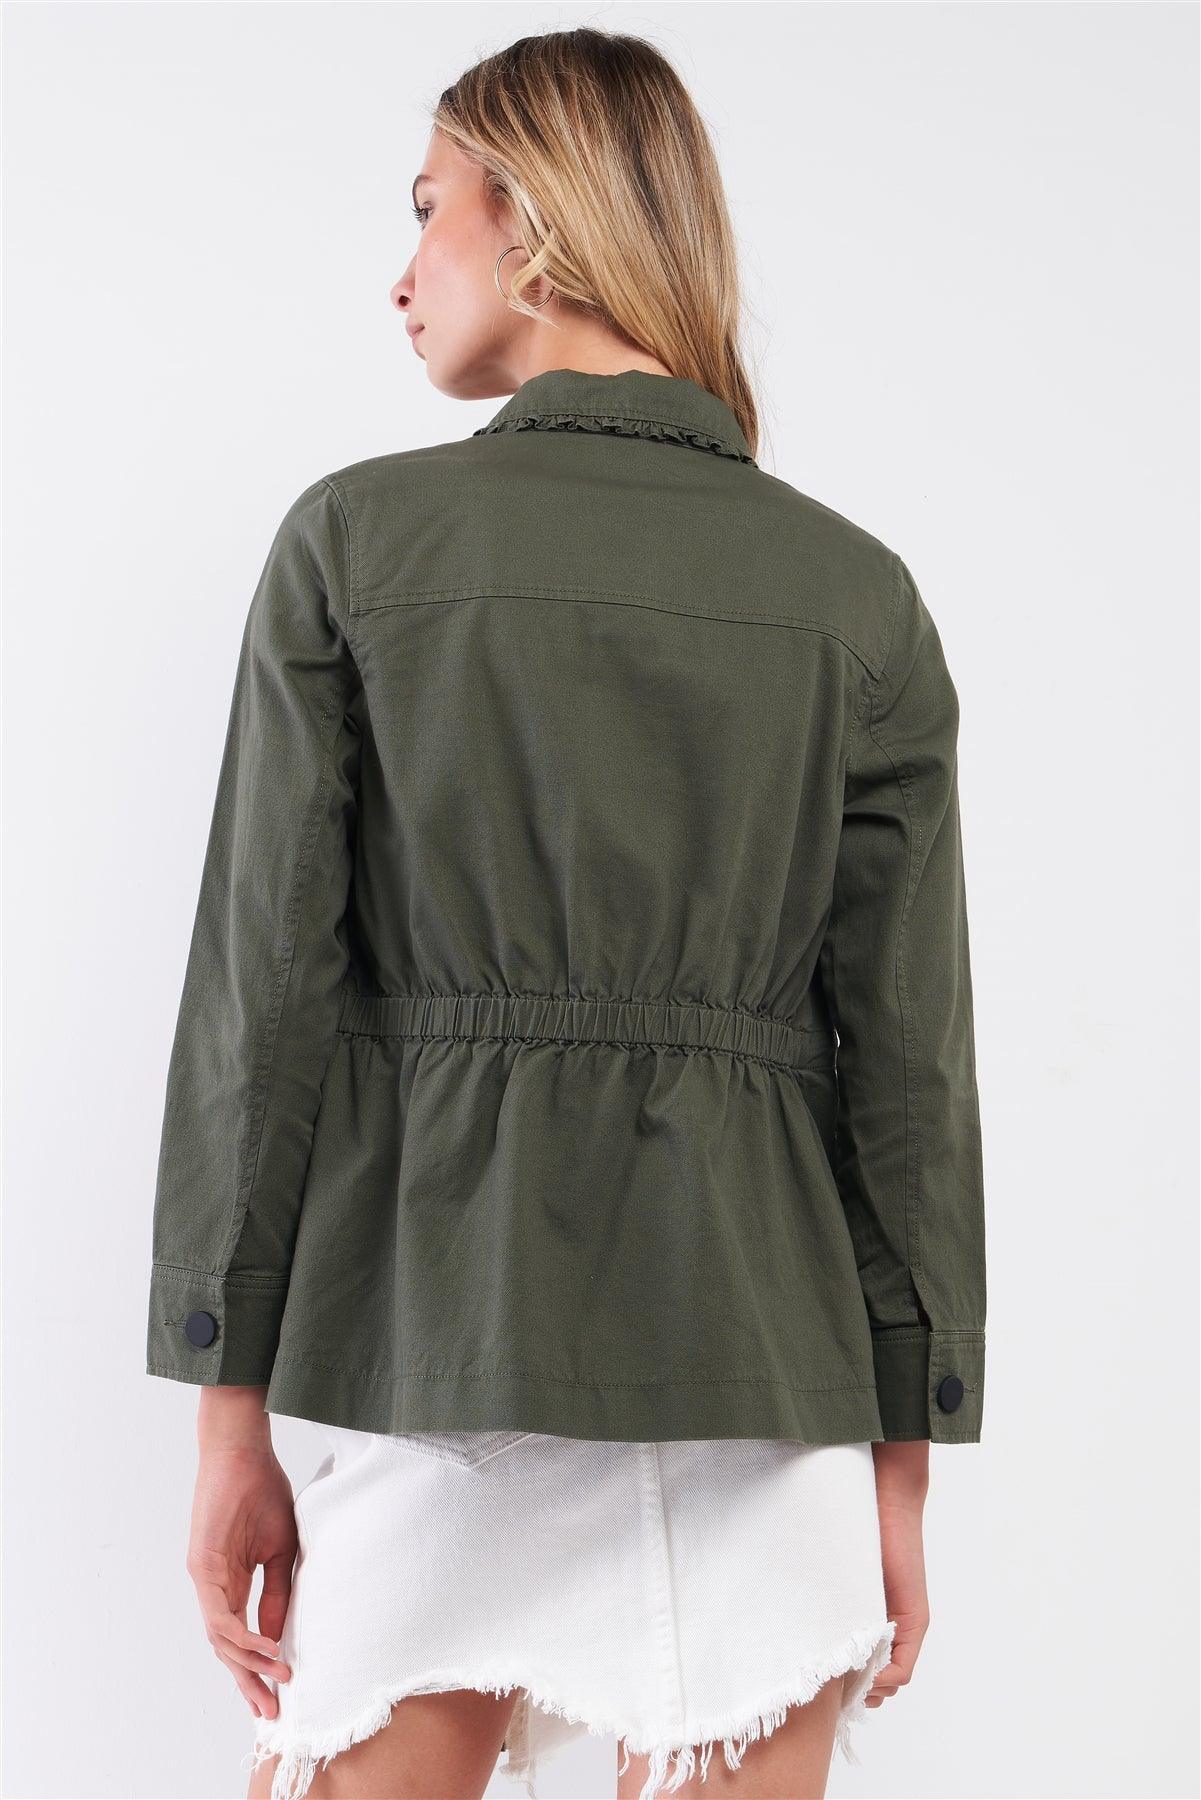 Olive Frill Trim Babydoll Collar Button-Down Front Adjustable Fitness Summer Jacket /1-2-2-1